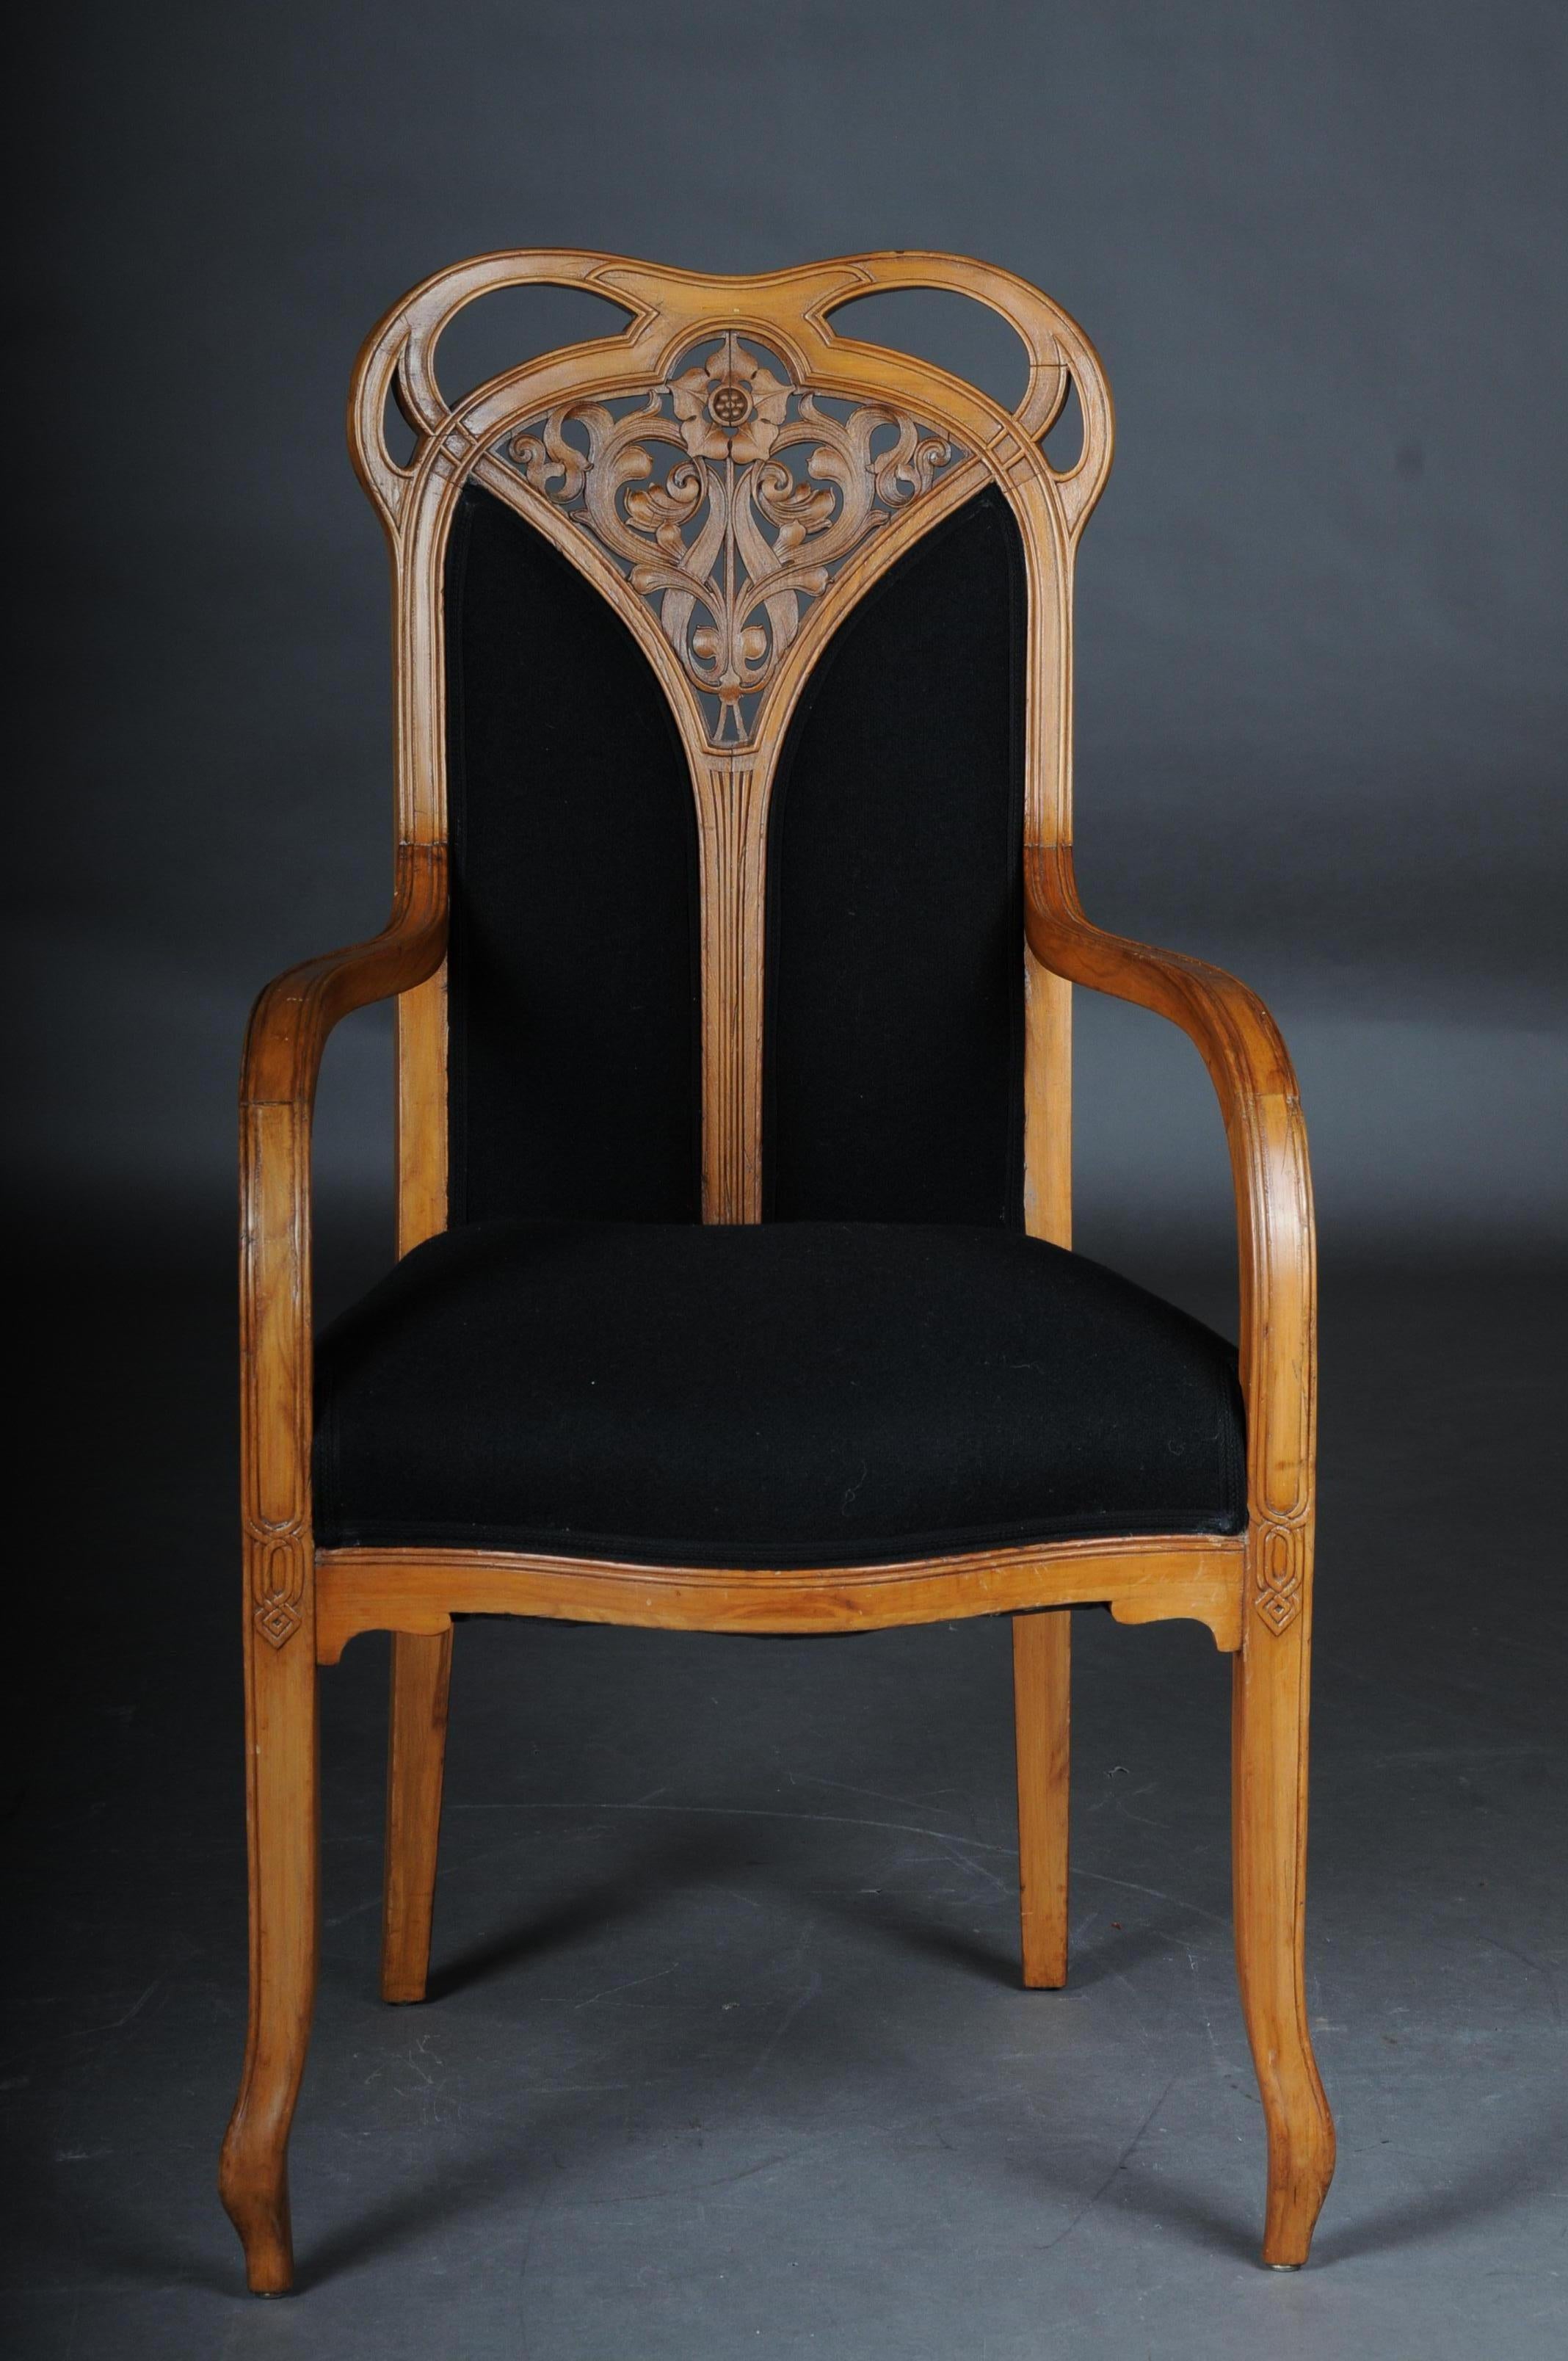 Art Nouveau / Nancy, armchair chair Majorelle

Solid wood pear tree. Probably Louis Majorelle Nancy France, 1900.
Very finely designed frame with floral relief carvings. Fine and very time-typical lines, a seating of the highest quality. Solid